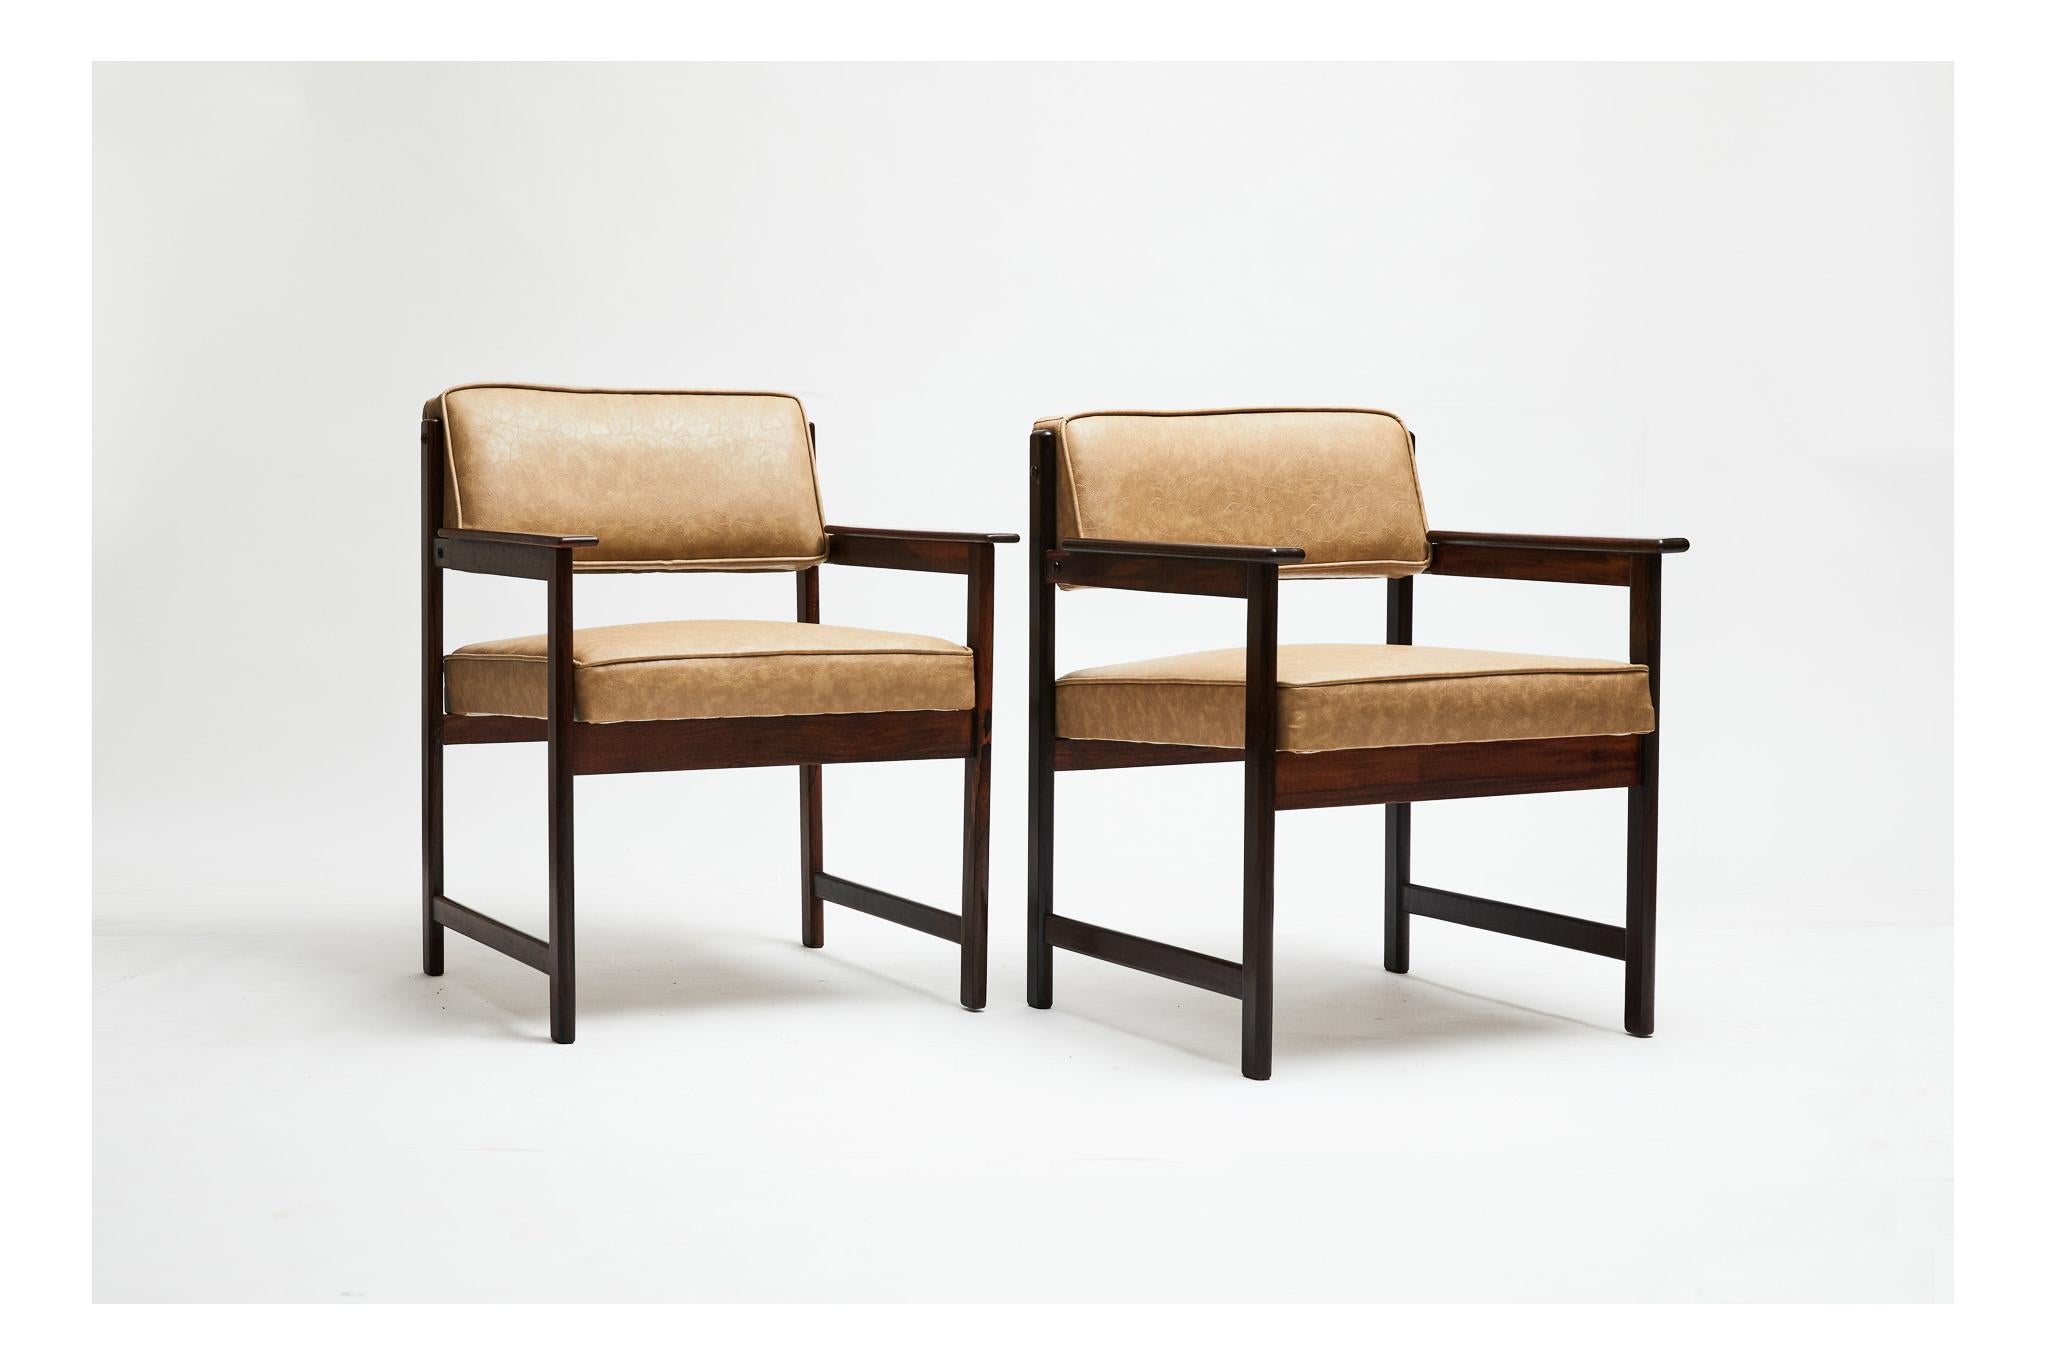 Midcentury Modern Armchairs in Hardwood & Beige Leather by Jorge Jabour, Brazil 1